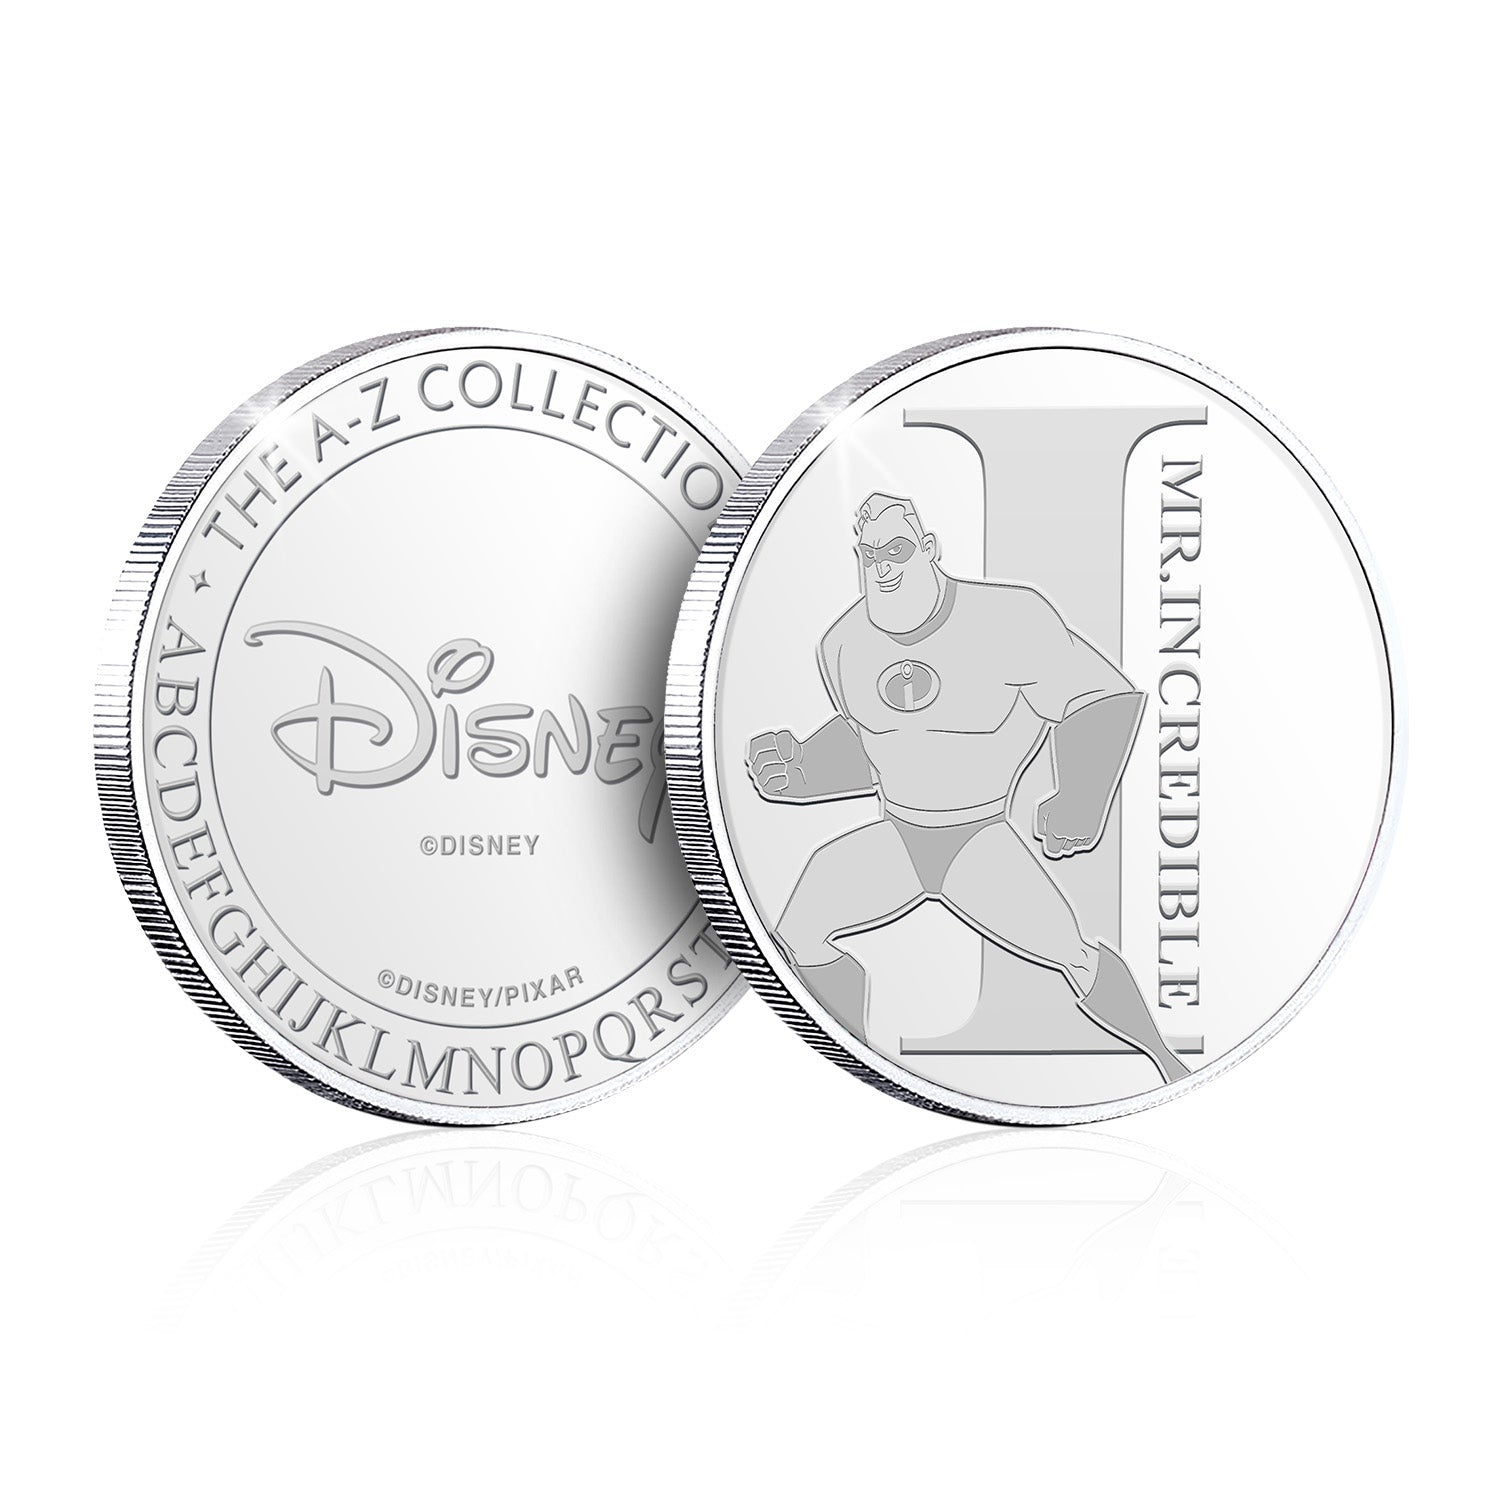 I is For Mr Incredible Silver-Plated Commemorative